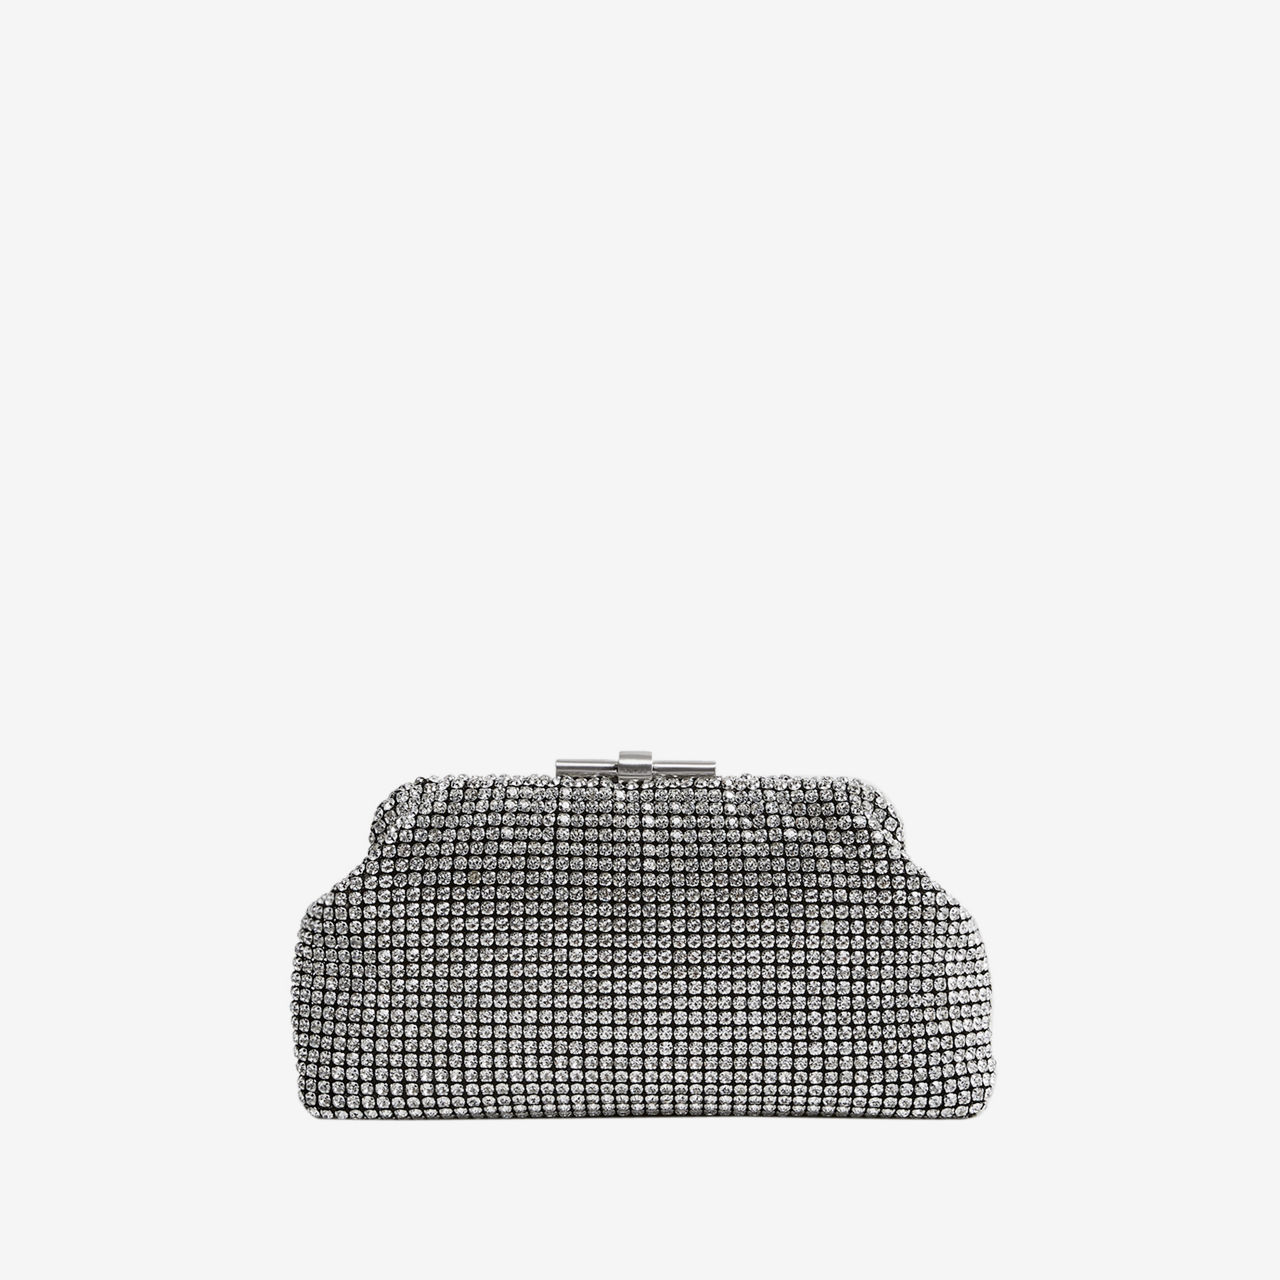 Pancia Woven Leather Clutch